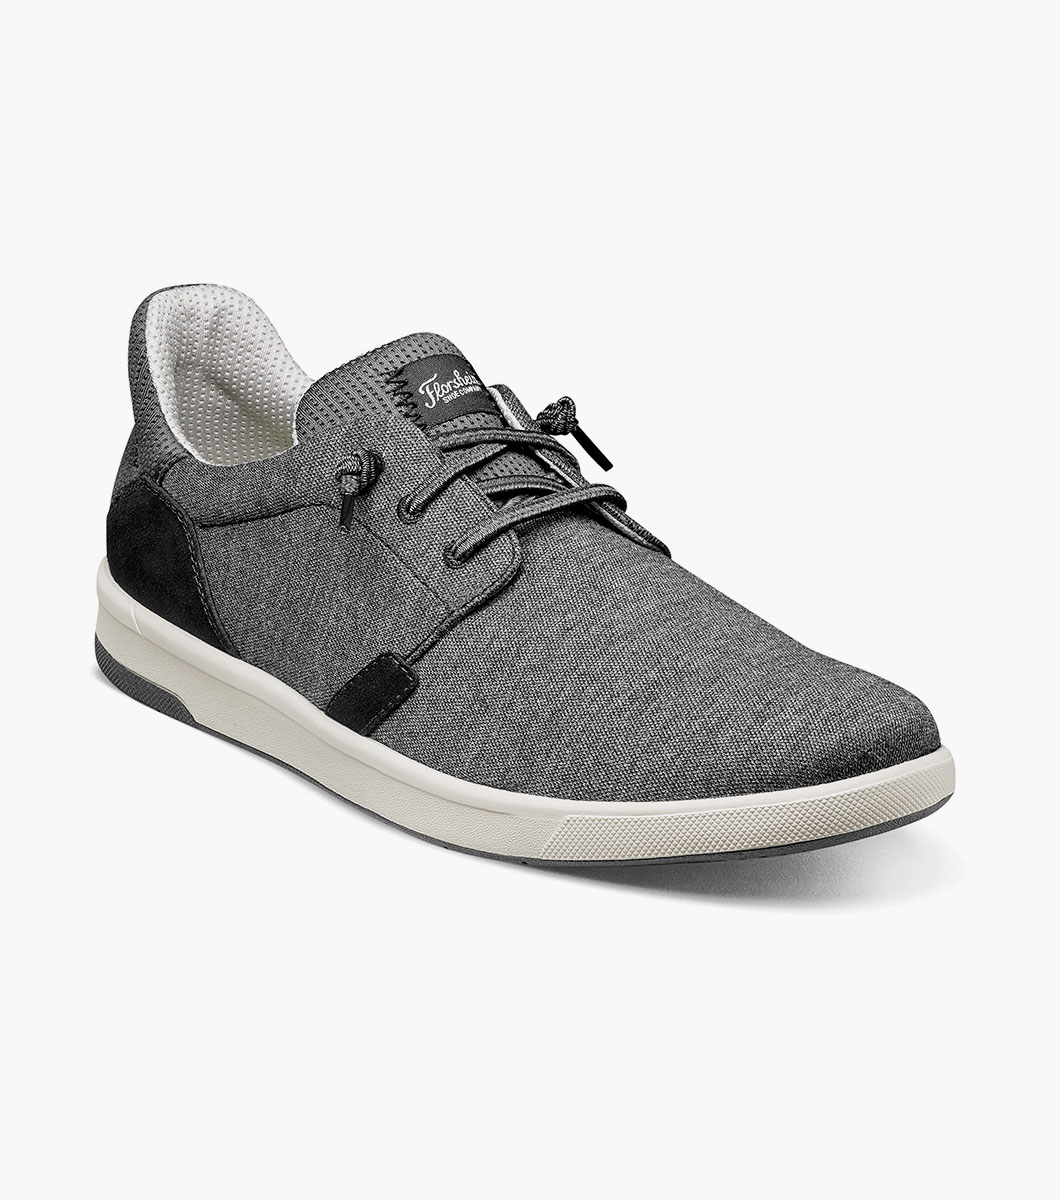 Crossover Canvas Plain Toe Slip On Men's Casual Shoes